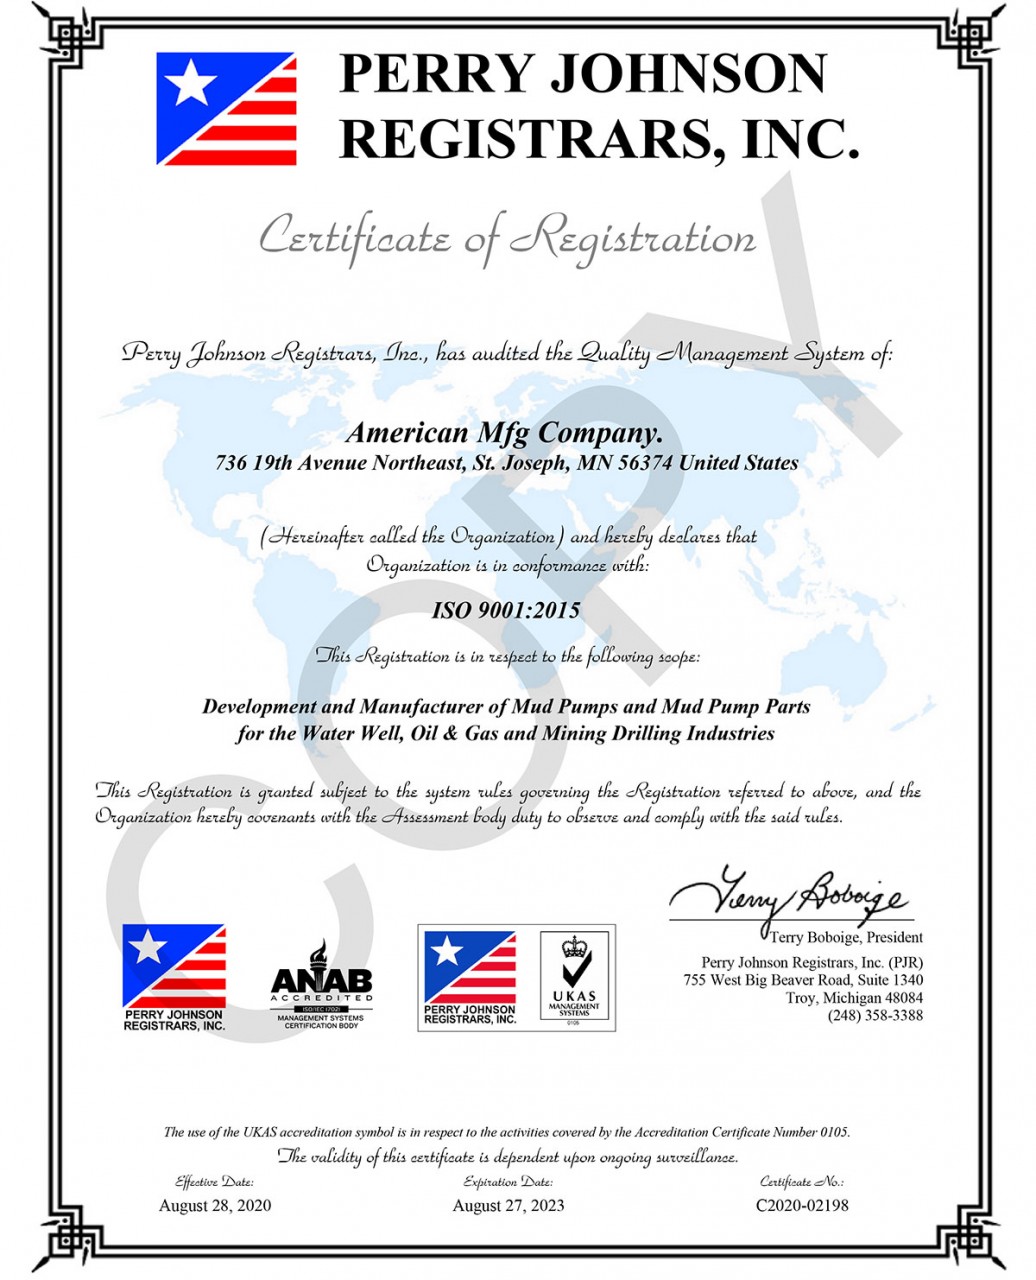 American Mfg Company has been awarded ISO 9001:2015 Certification